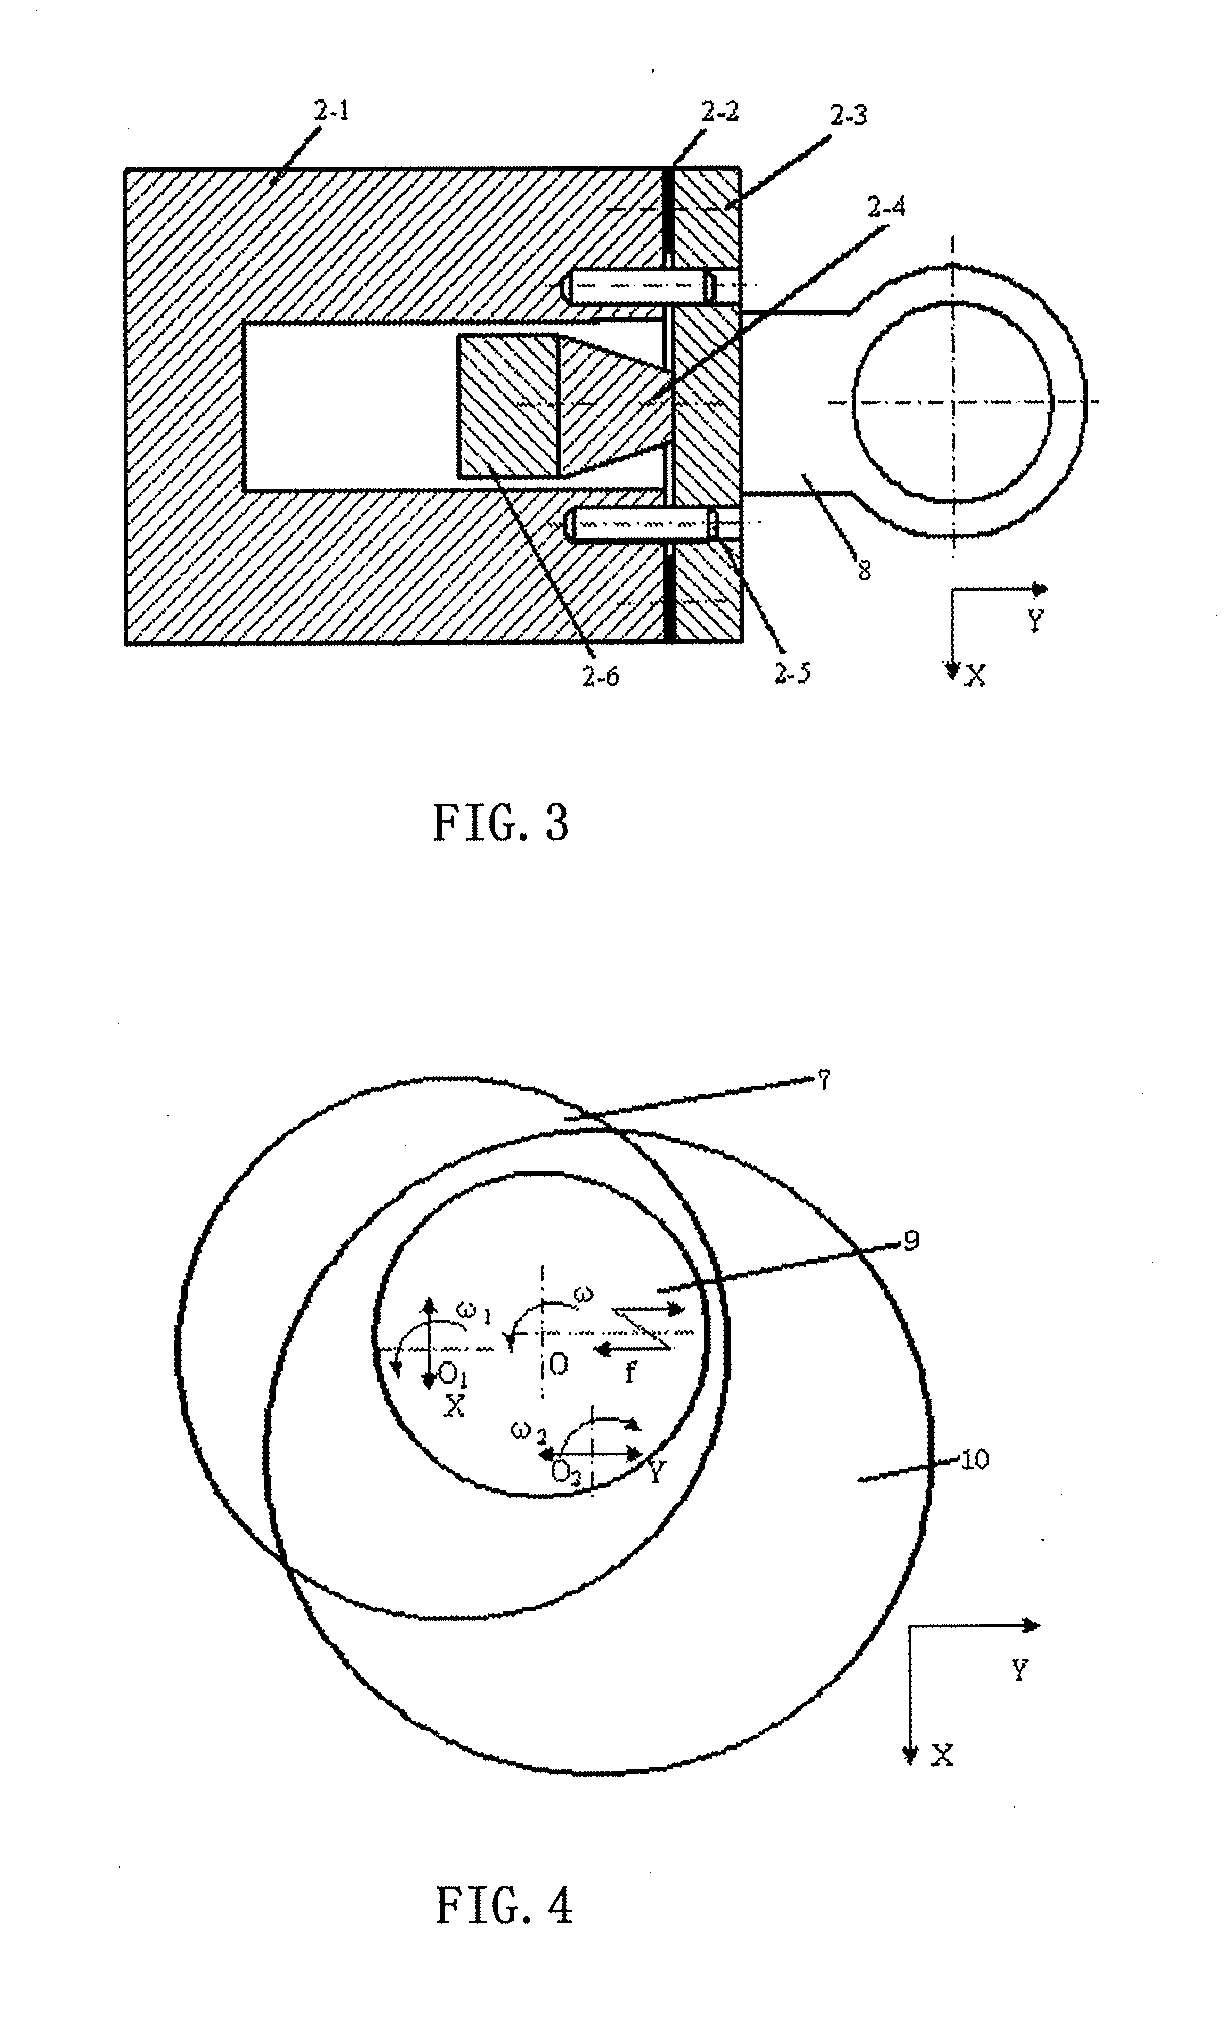 Computer numerical control machine tool for grinding two sides of a plane by shifting self-rotation and ultrasonic vibration